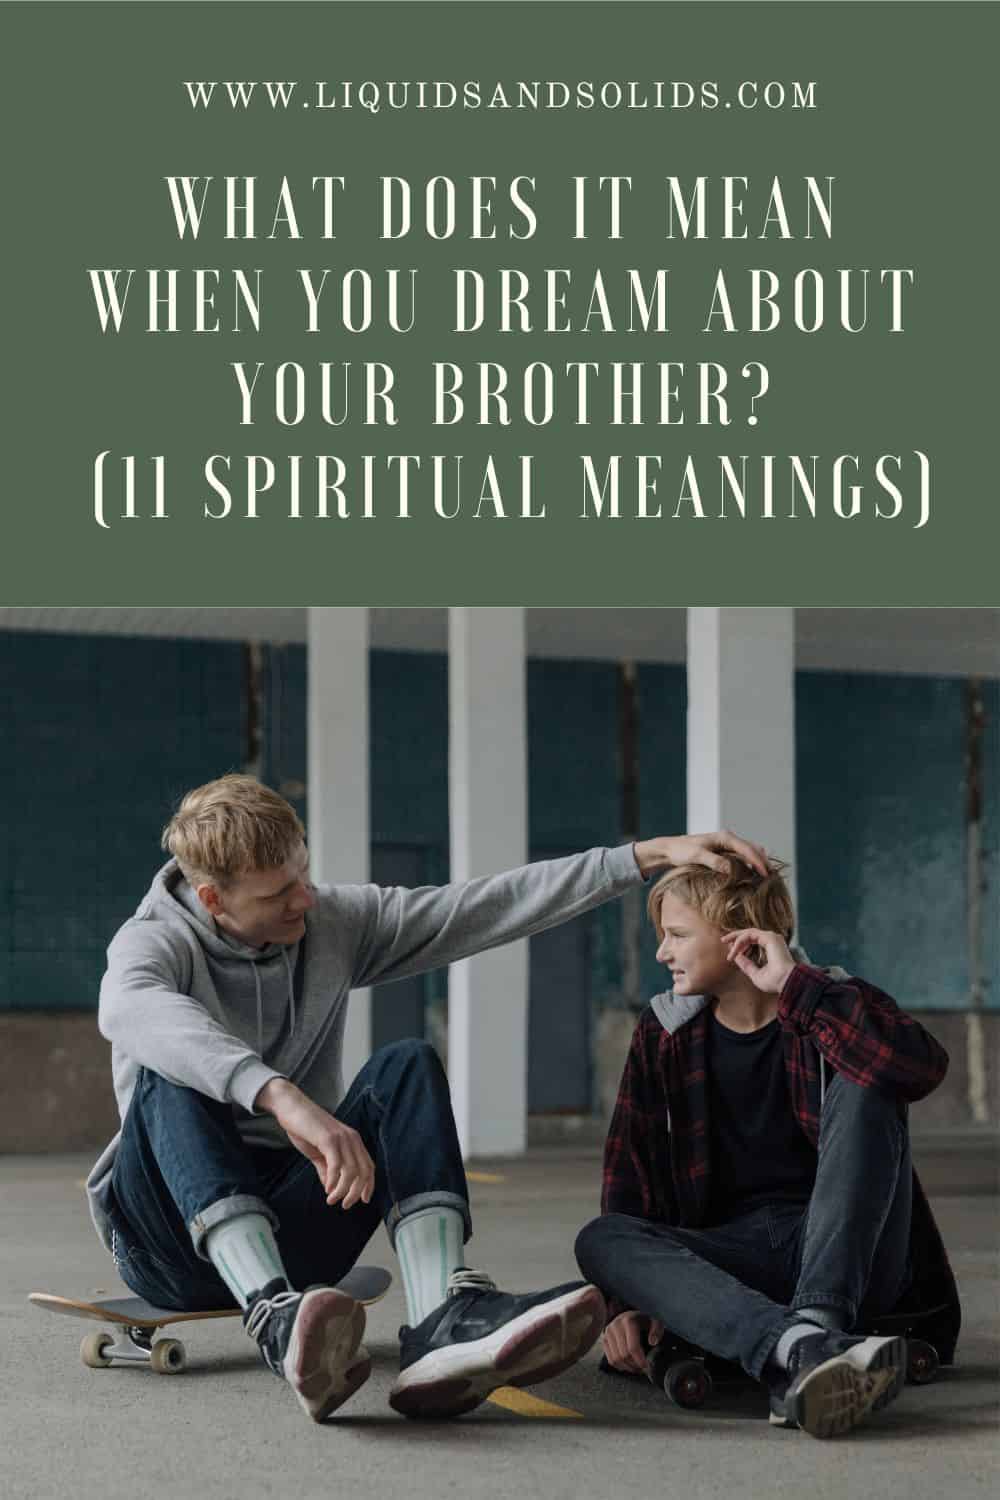 Spiritual Meaning of Dreaming About Your Brother